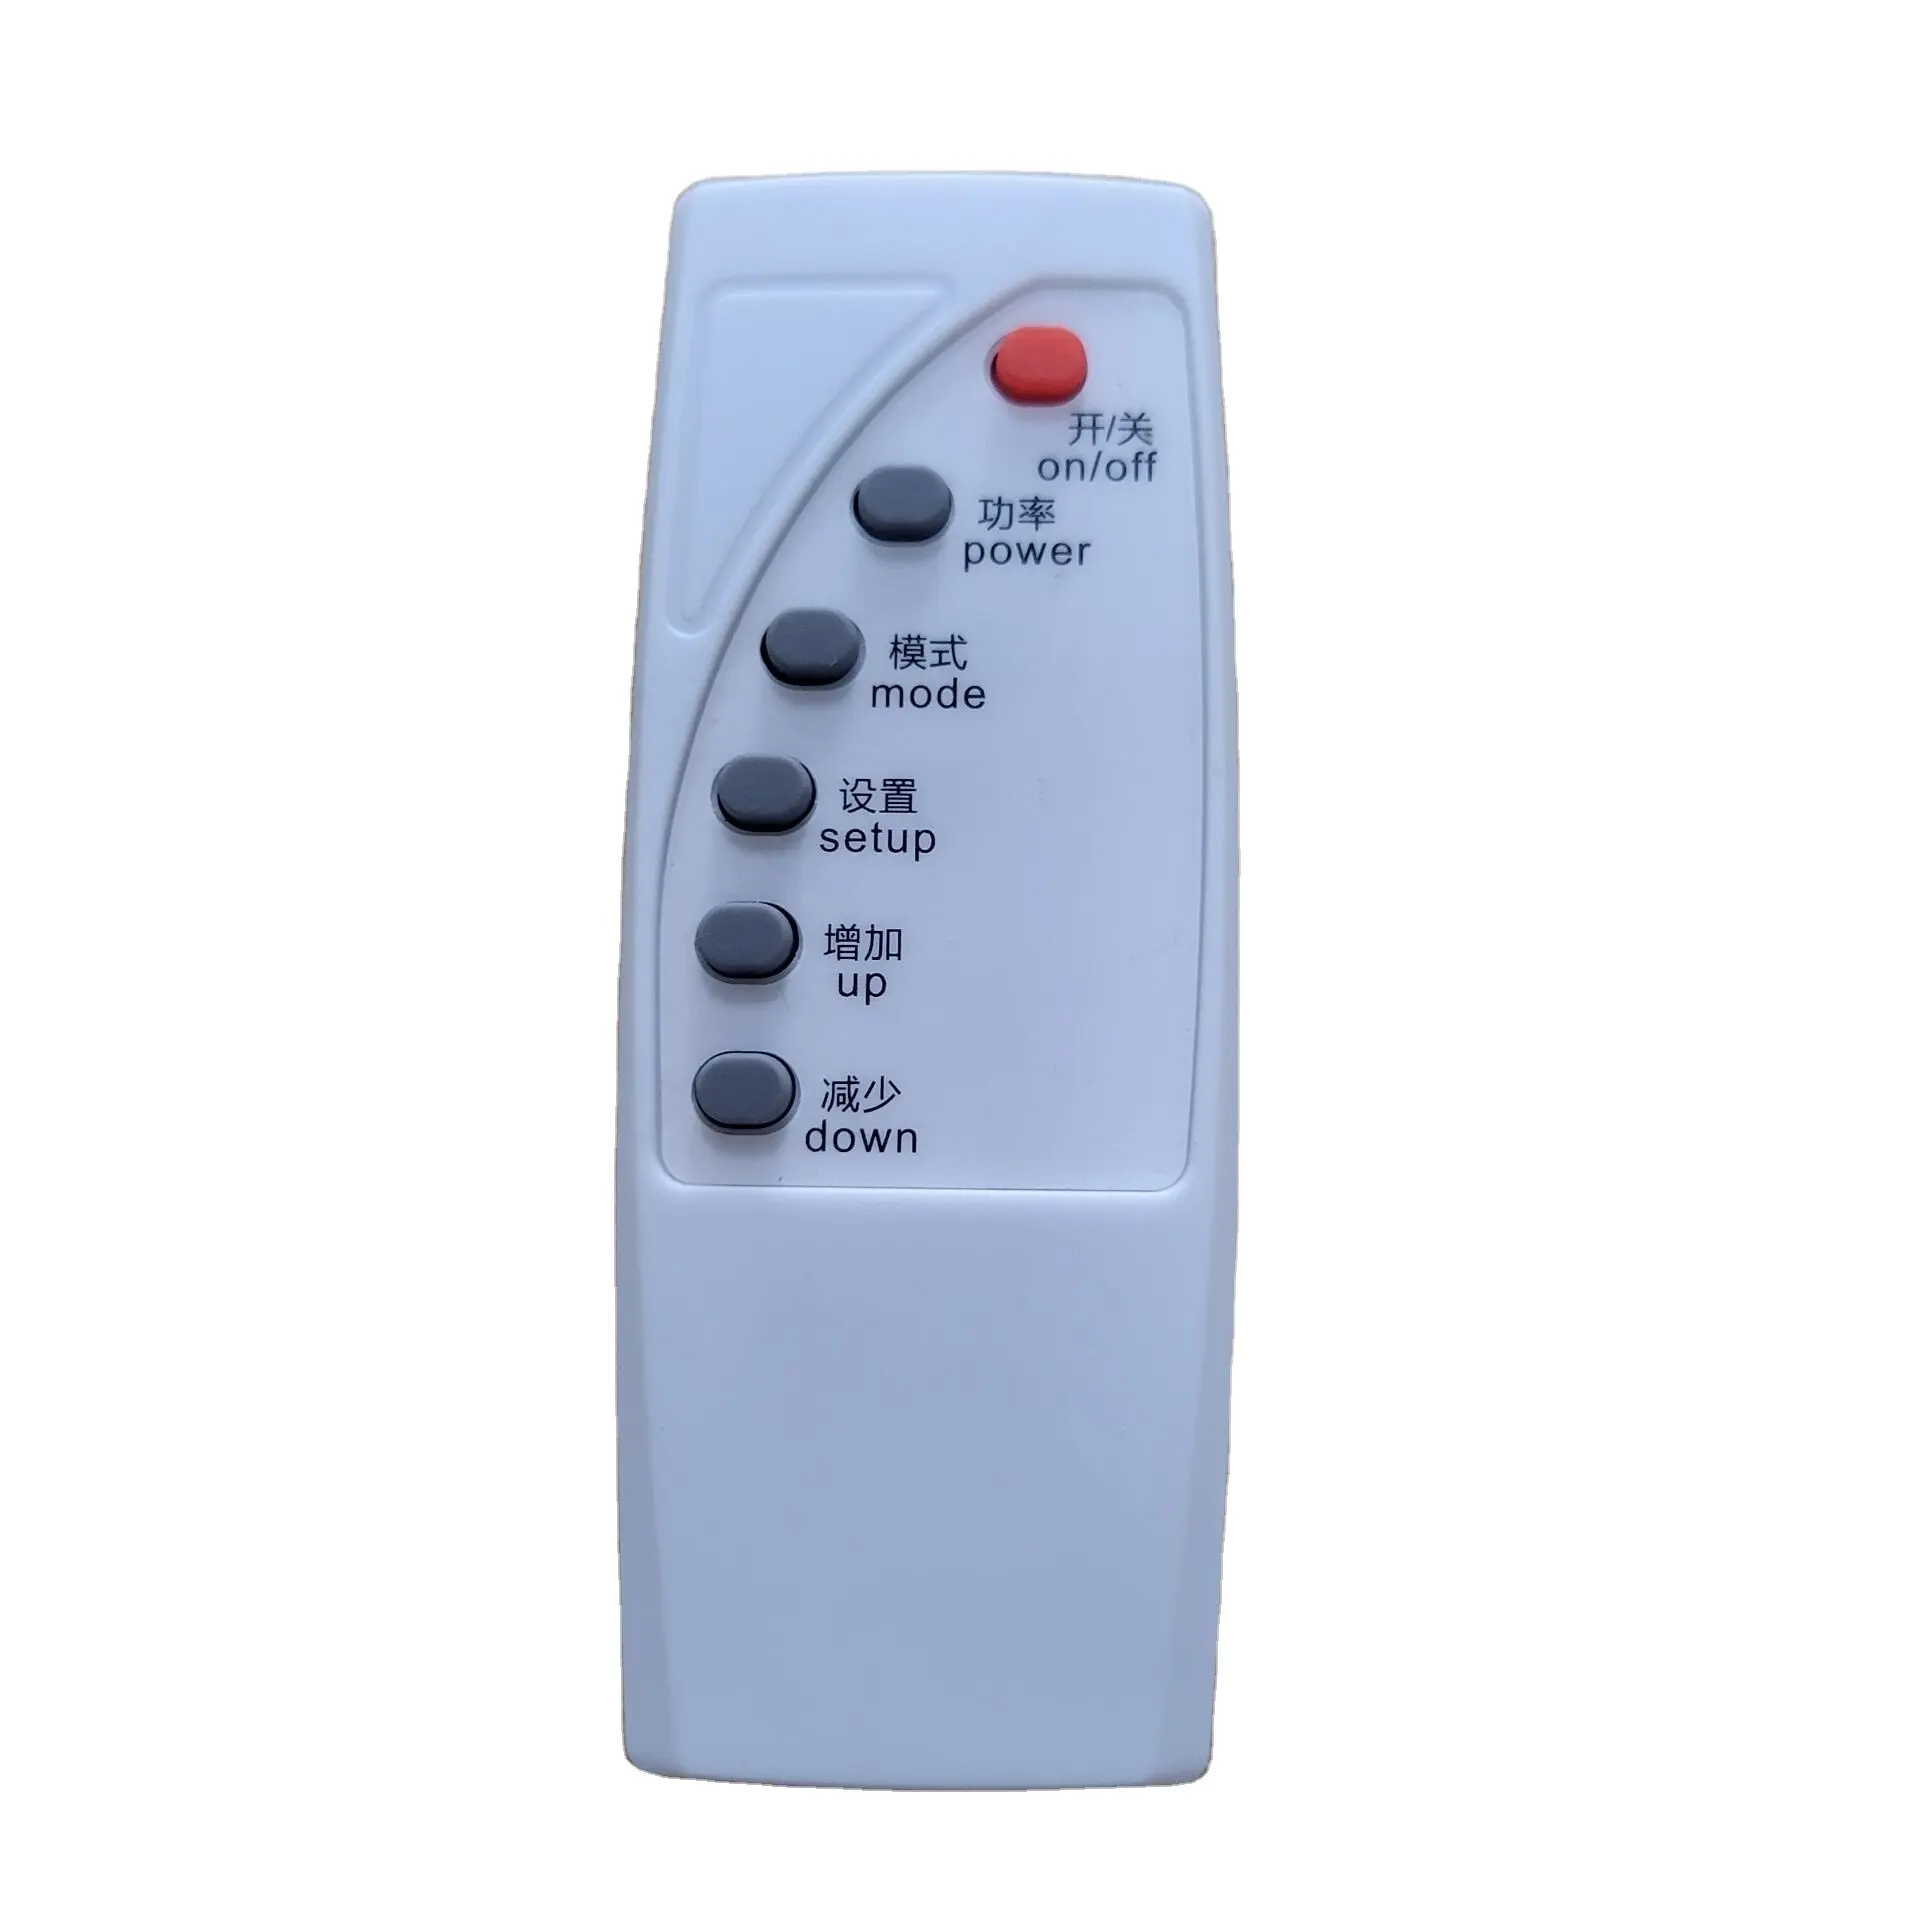 High quality customization IR remote control fit for air cooler fan smart home appliances controller